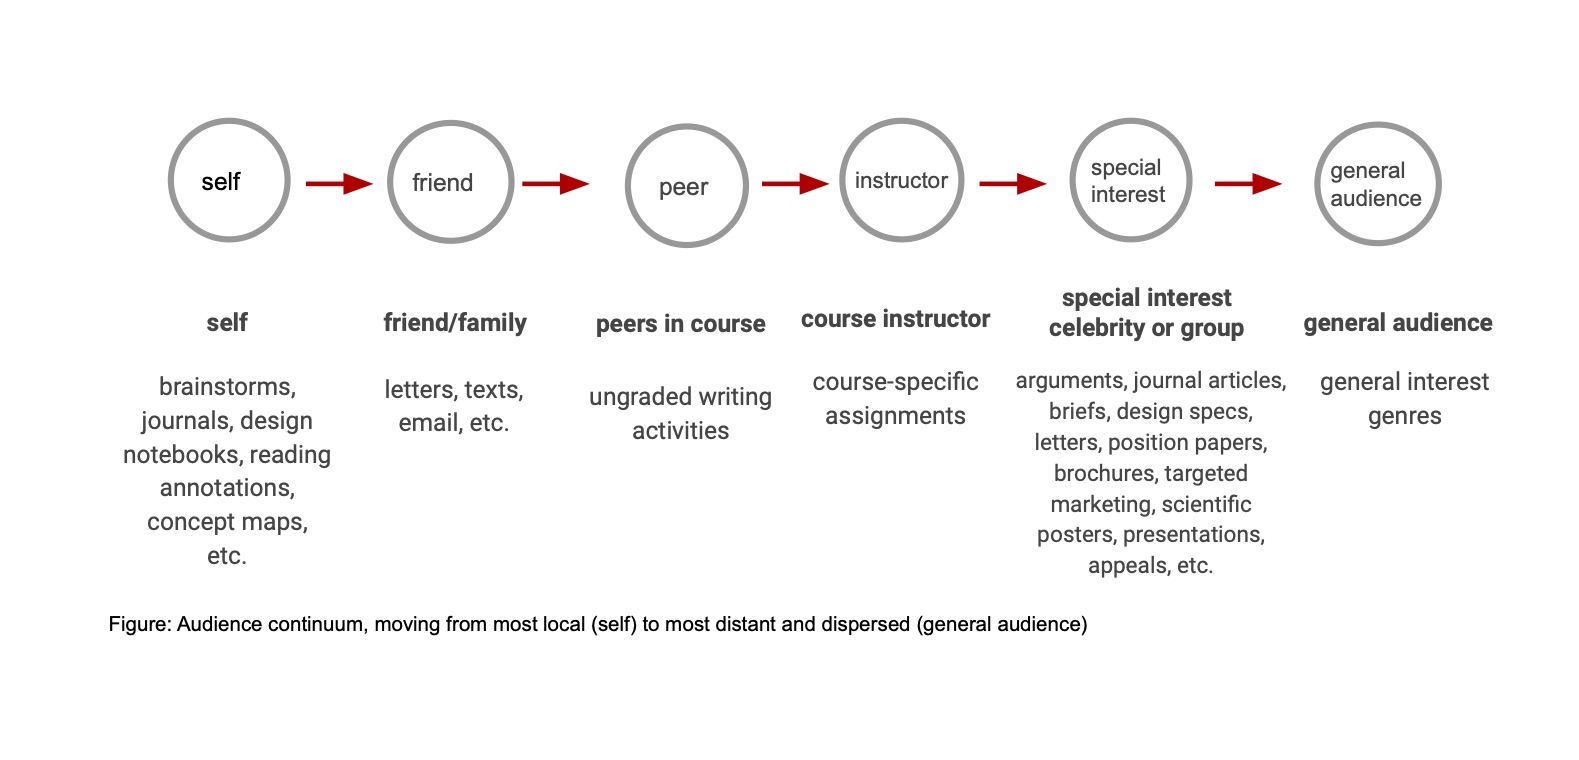 Audience continuum, moving from most local to most distant and dispersed